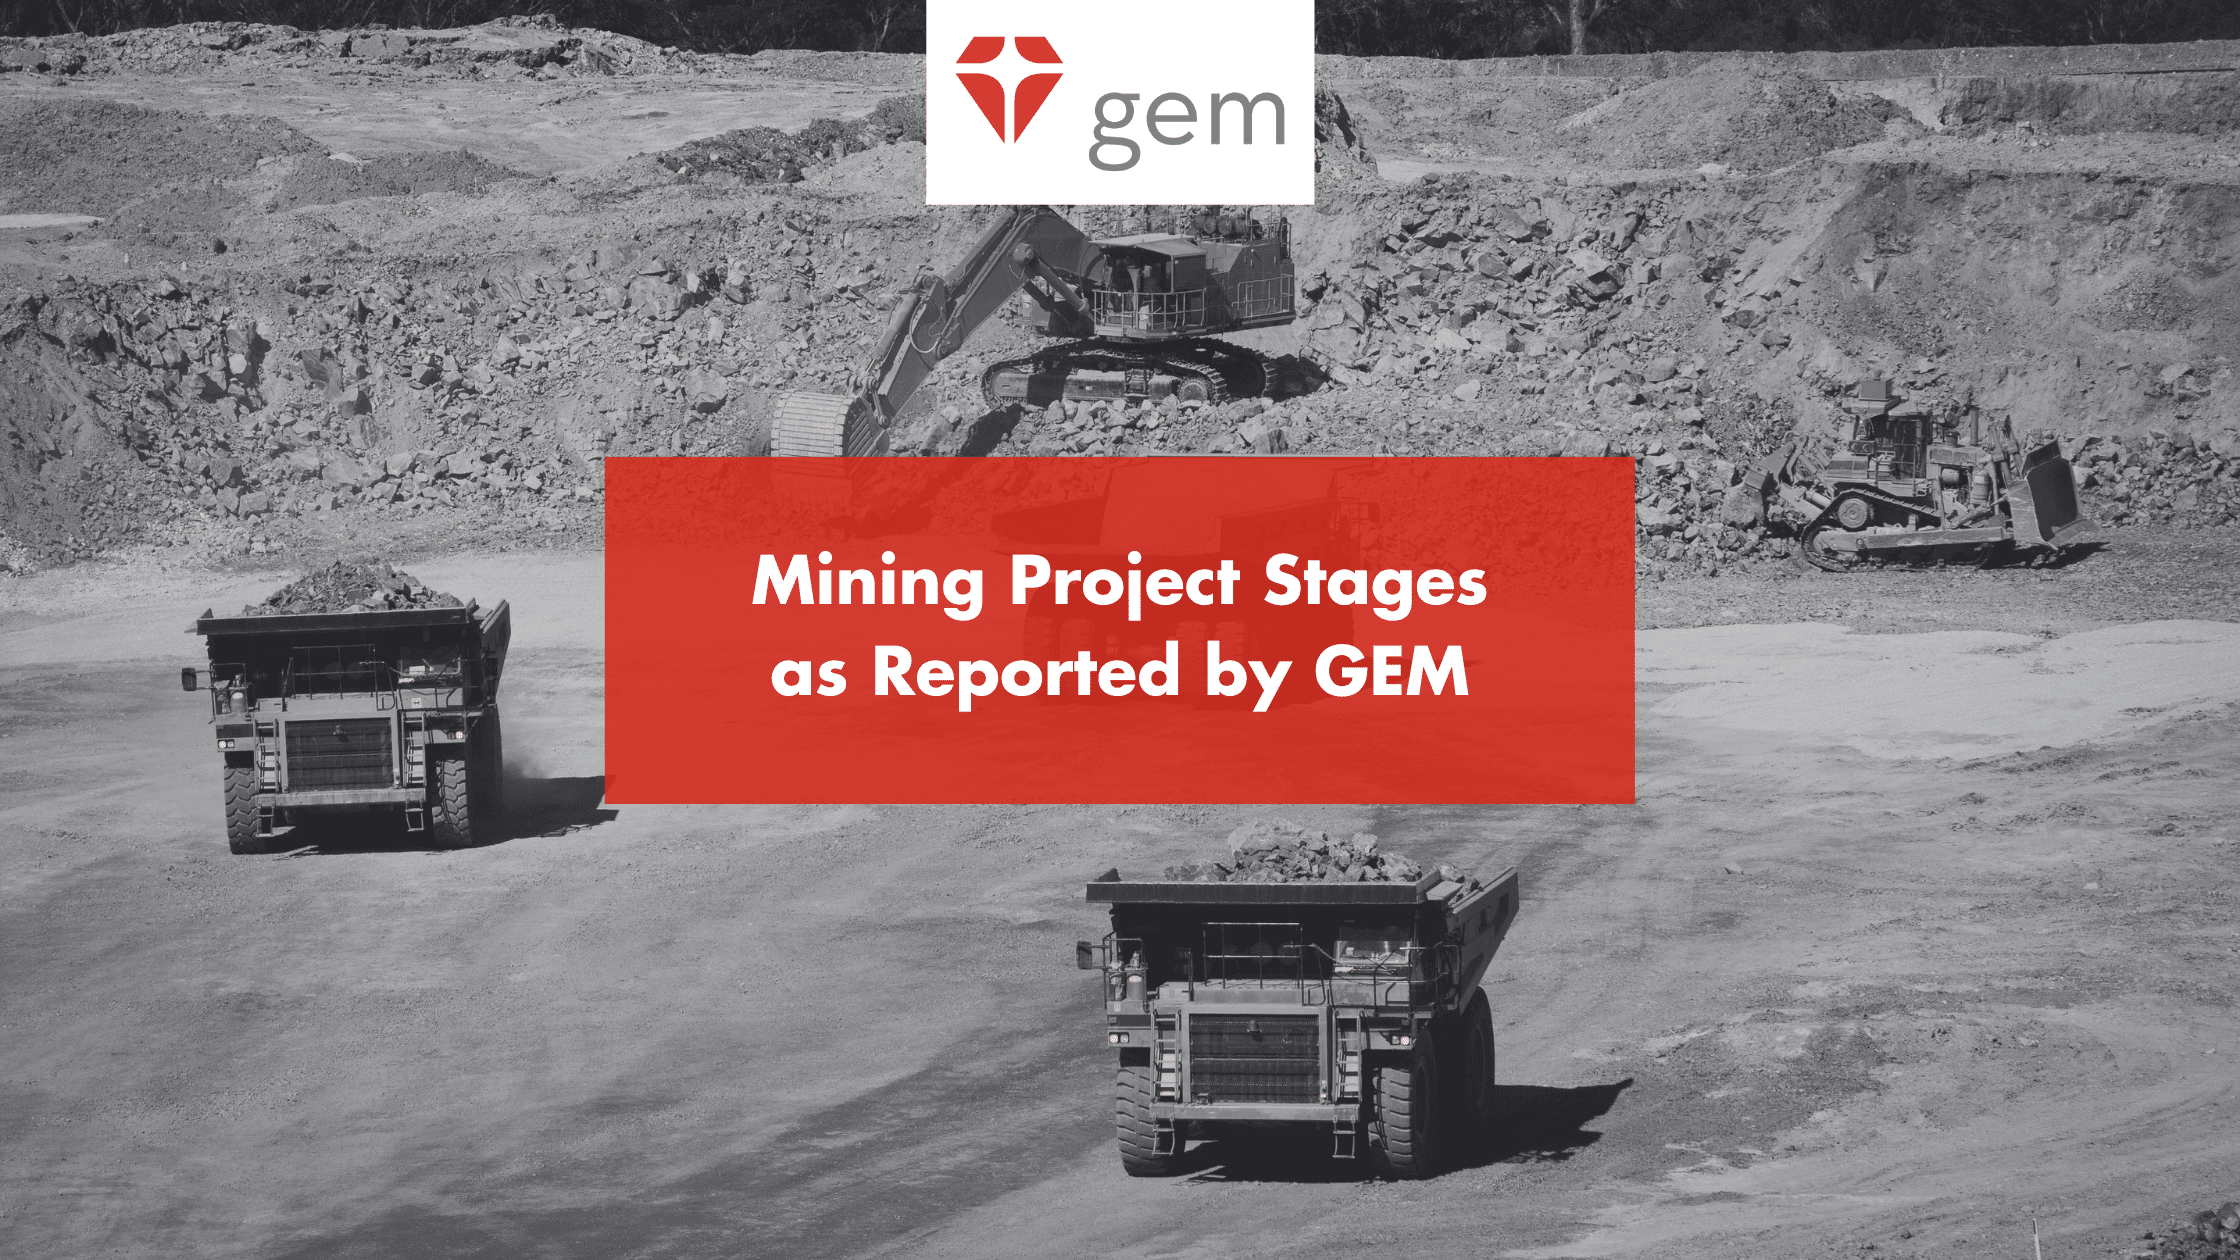 Mining Project Stages as Reported by GEM